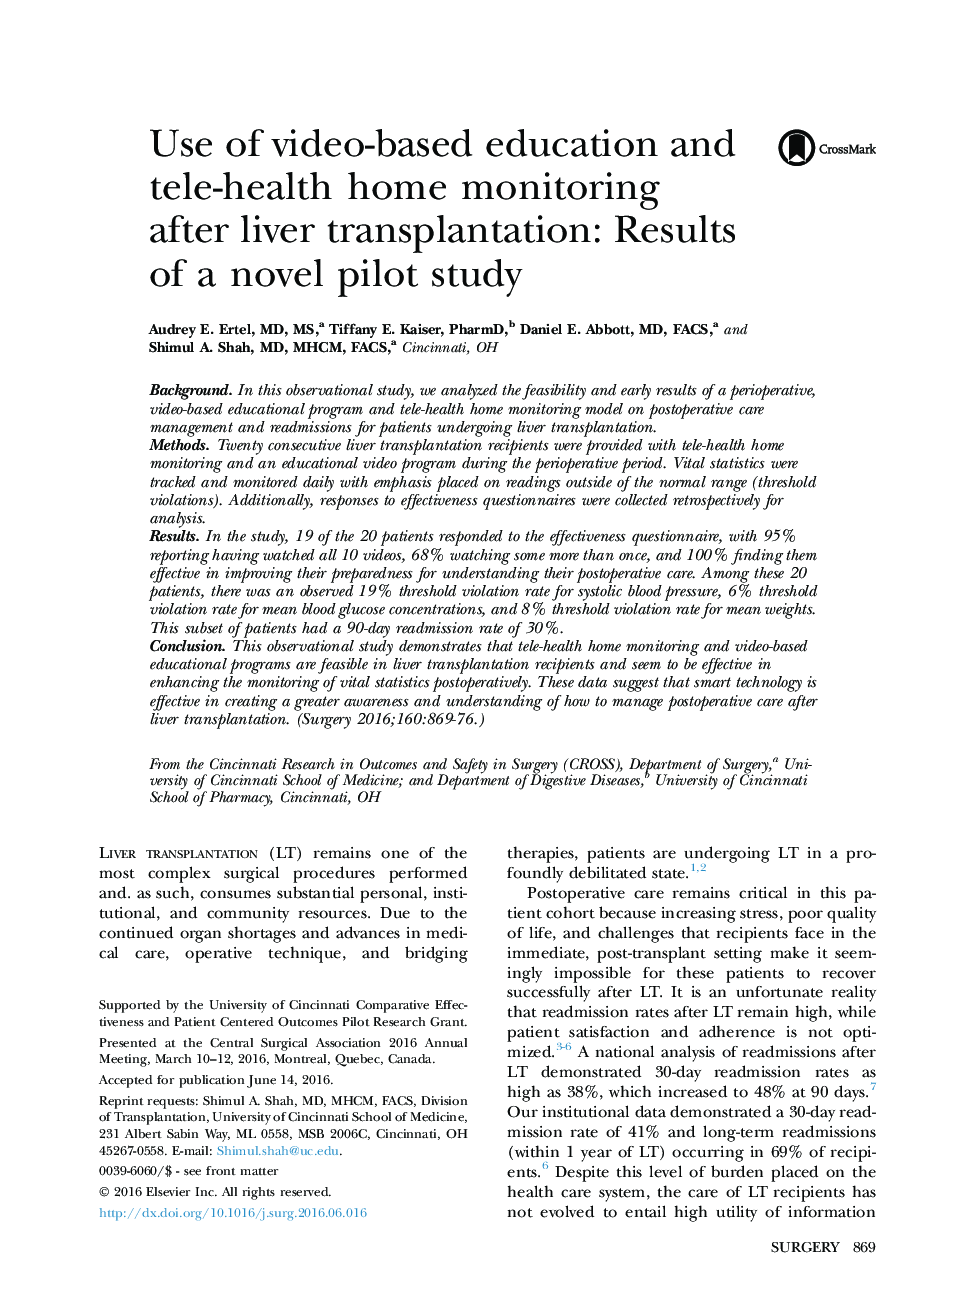 Use of video-based education and tele-health home monitoring after liver transplantation: Results of a novel pilot study 